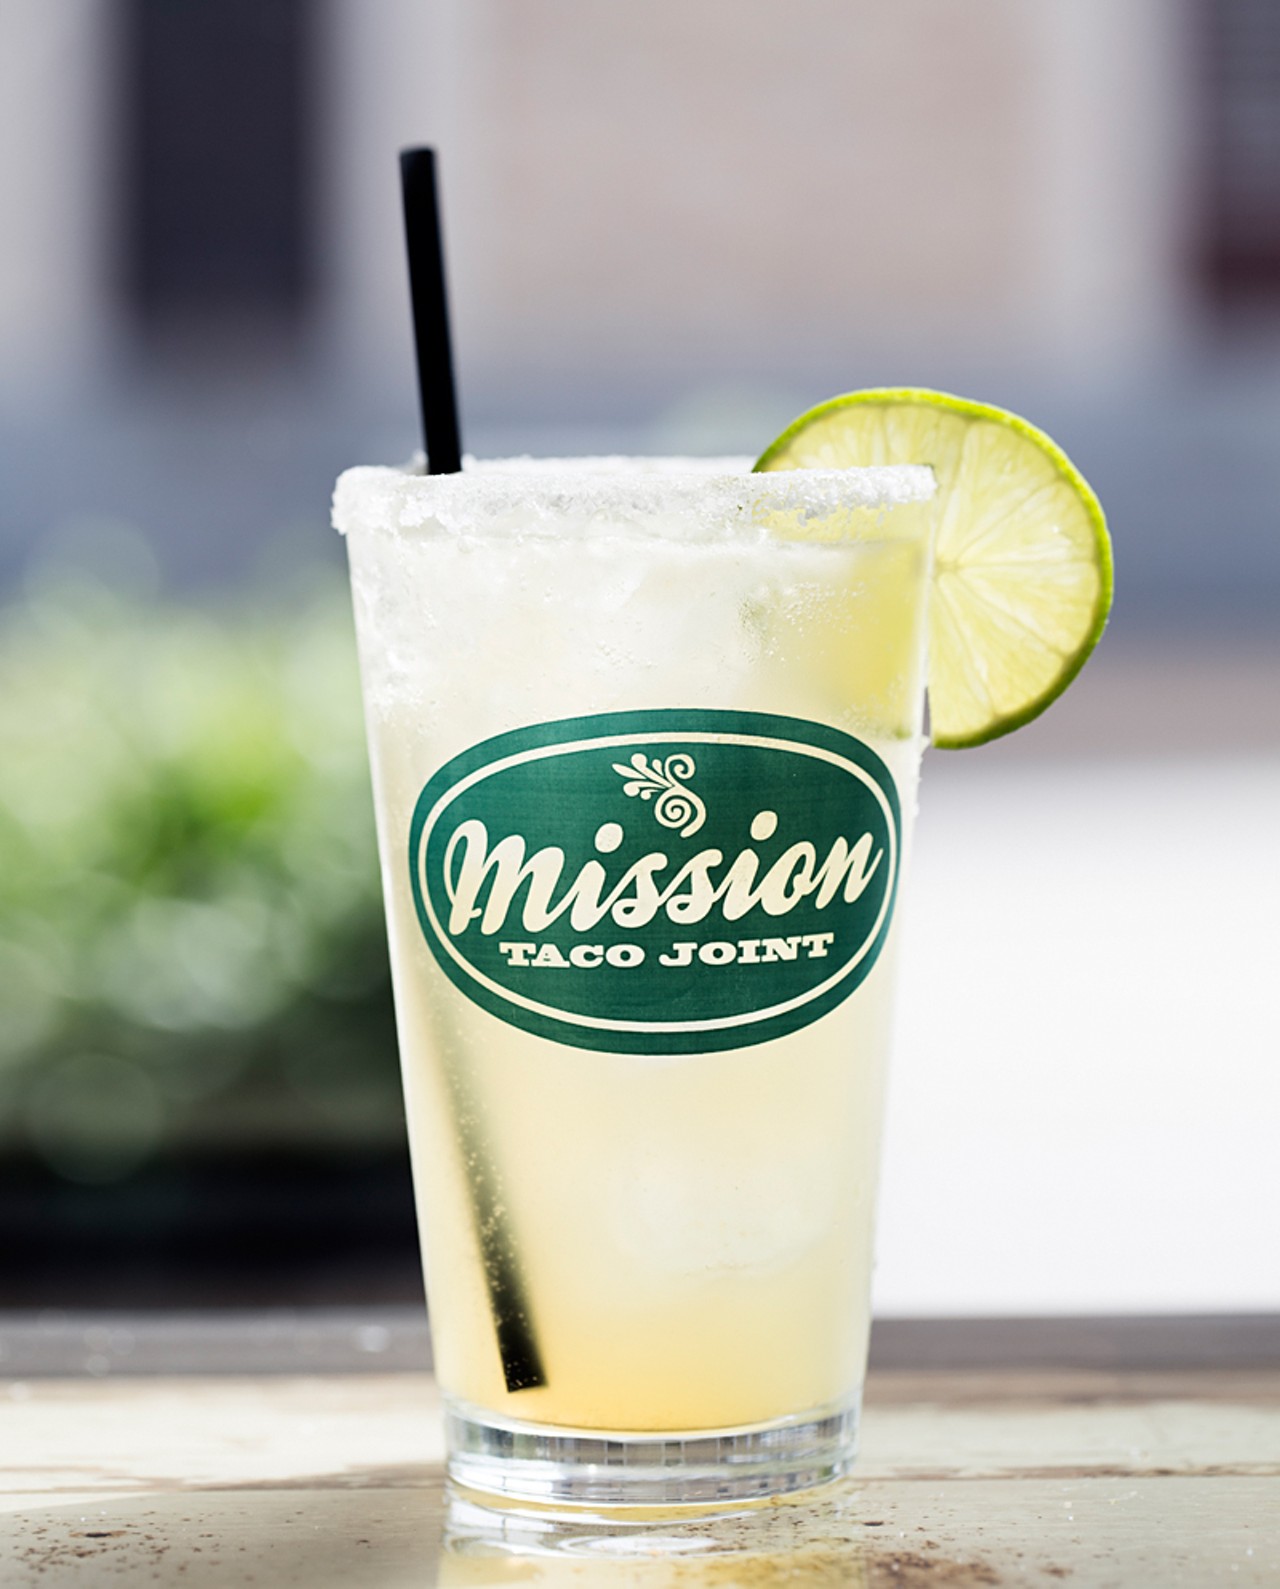 The Mission Margarita is made with blanco tequila, orange curacao and housemade lime-orange agua fresca. It's hand shaken and served in a salt-rimmed pint glass.